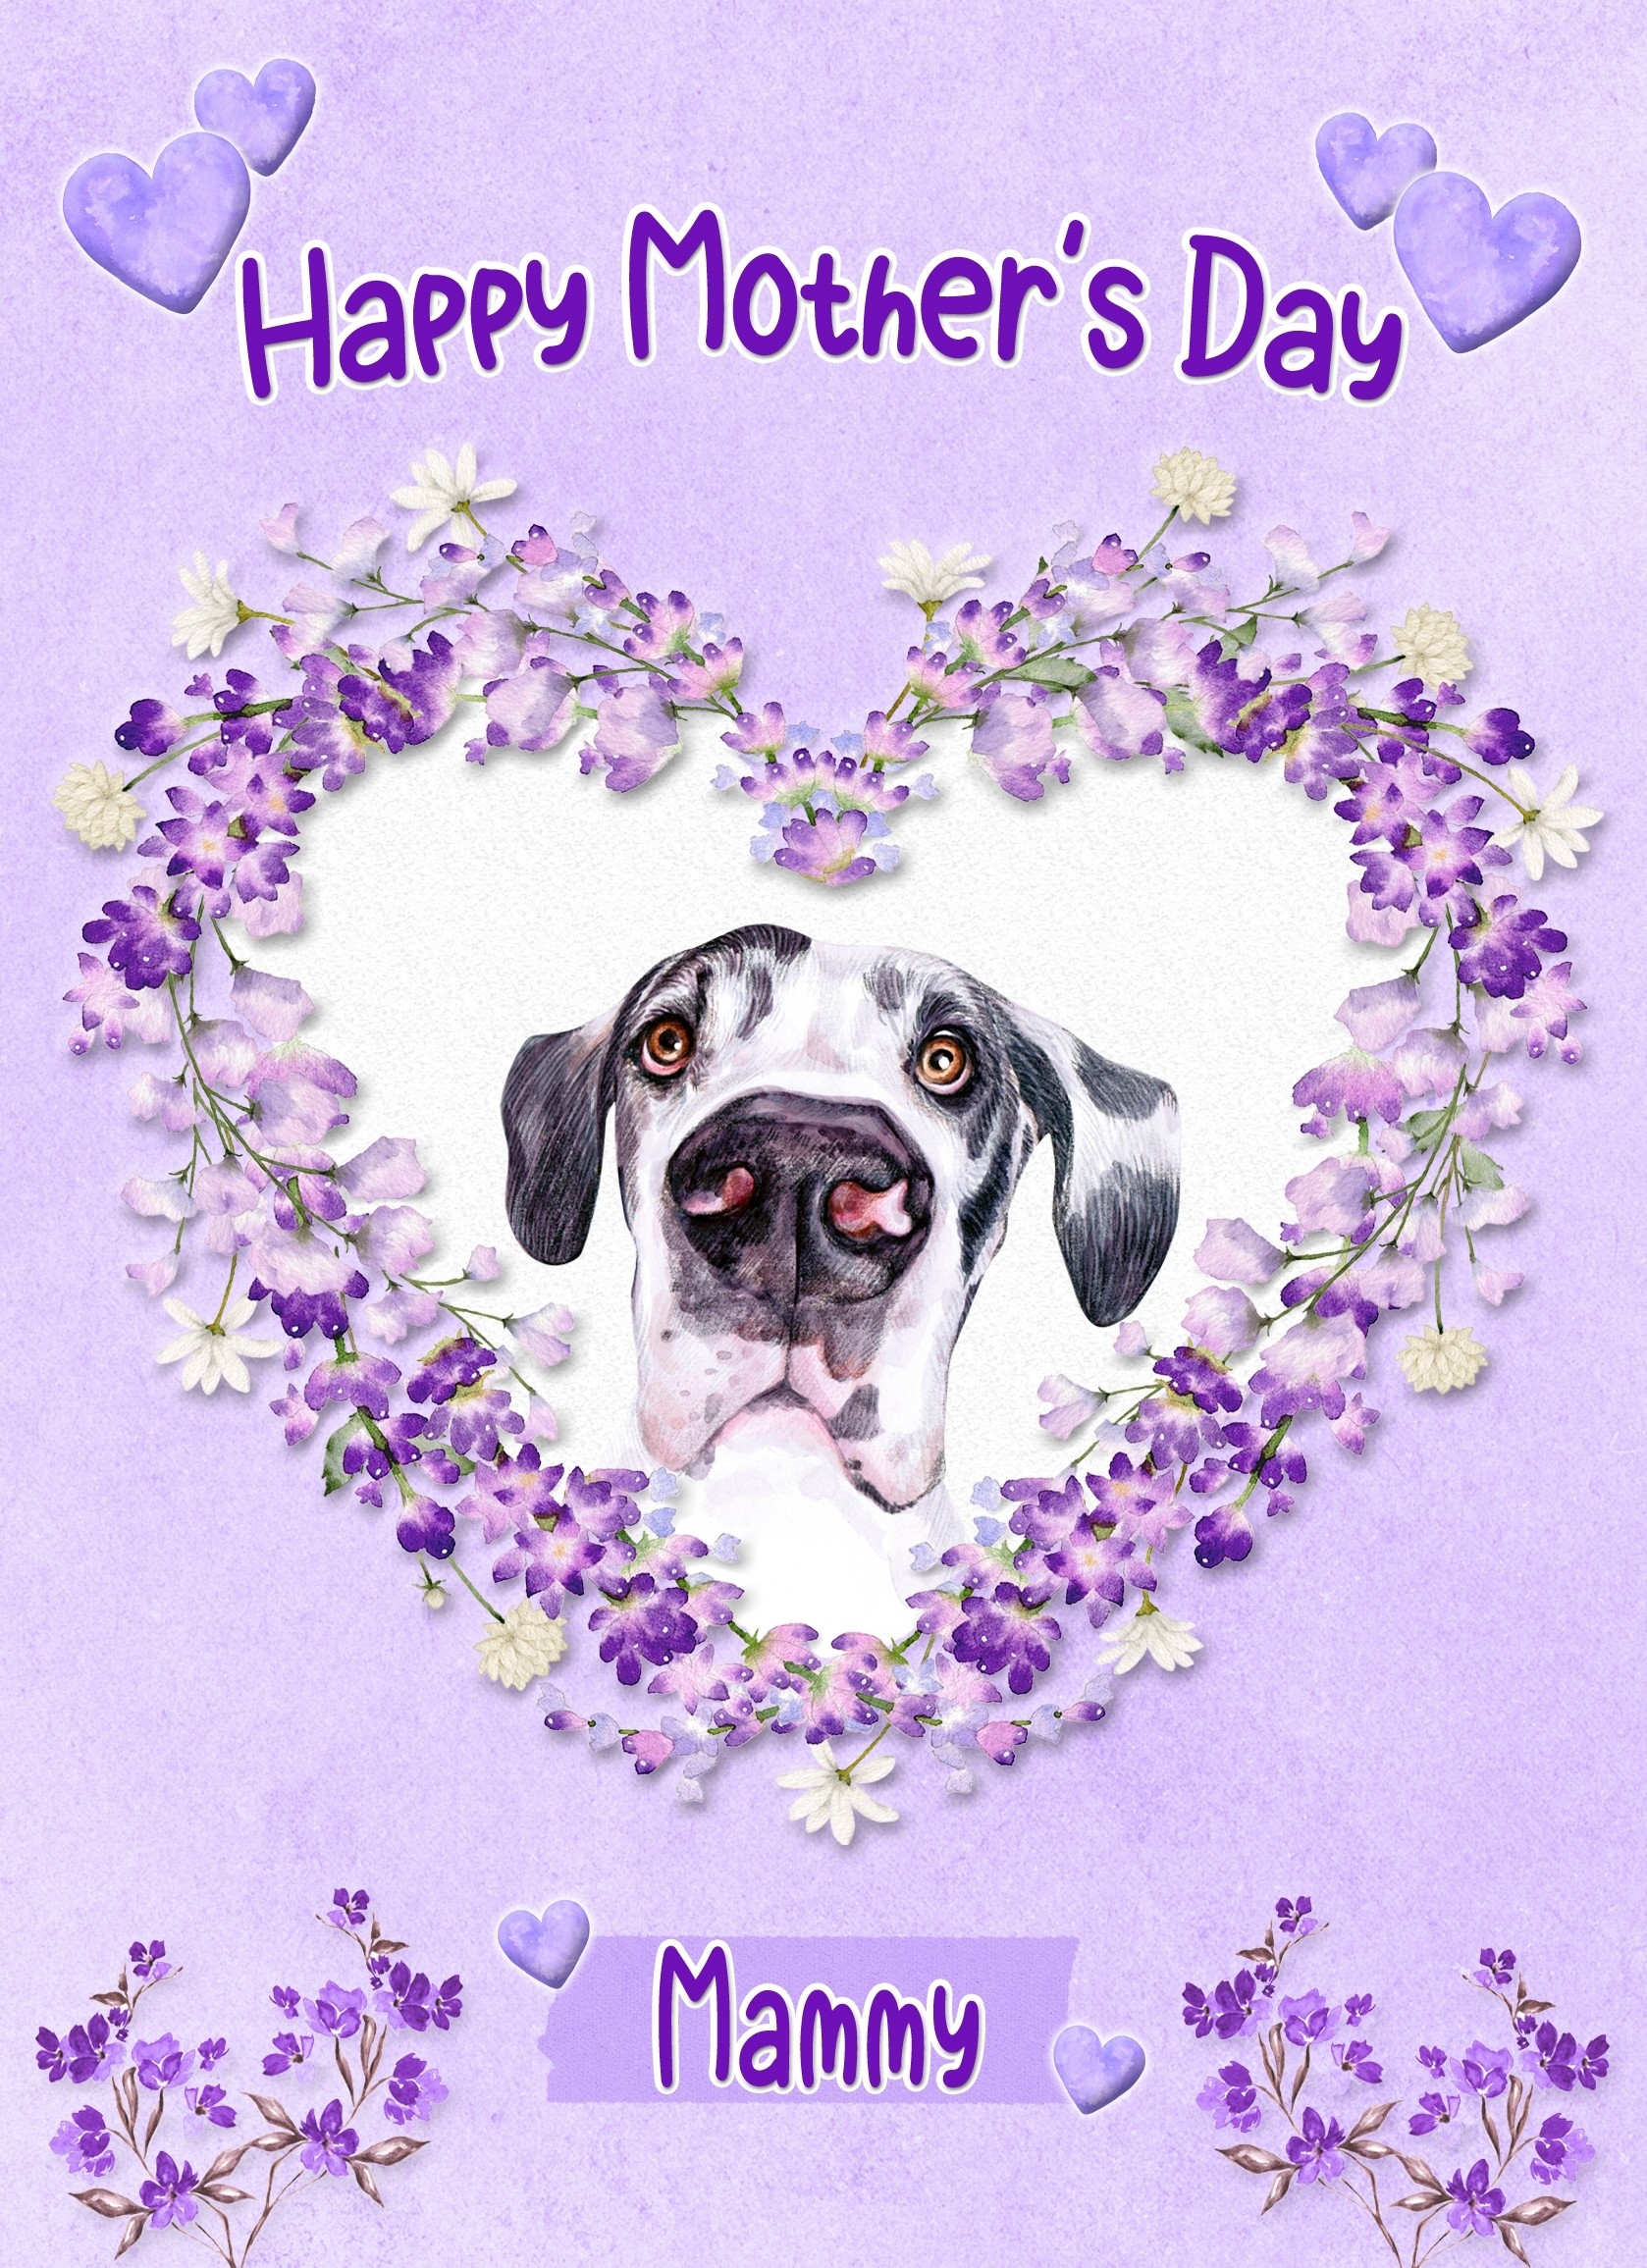 Great Dane Dog Mothers Day Card (Happy Mothers, Mammy)